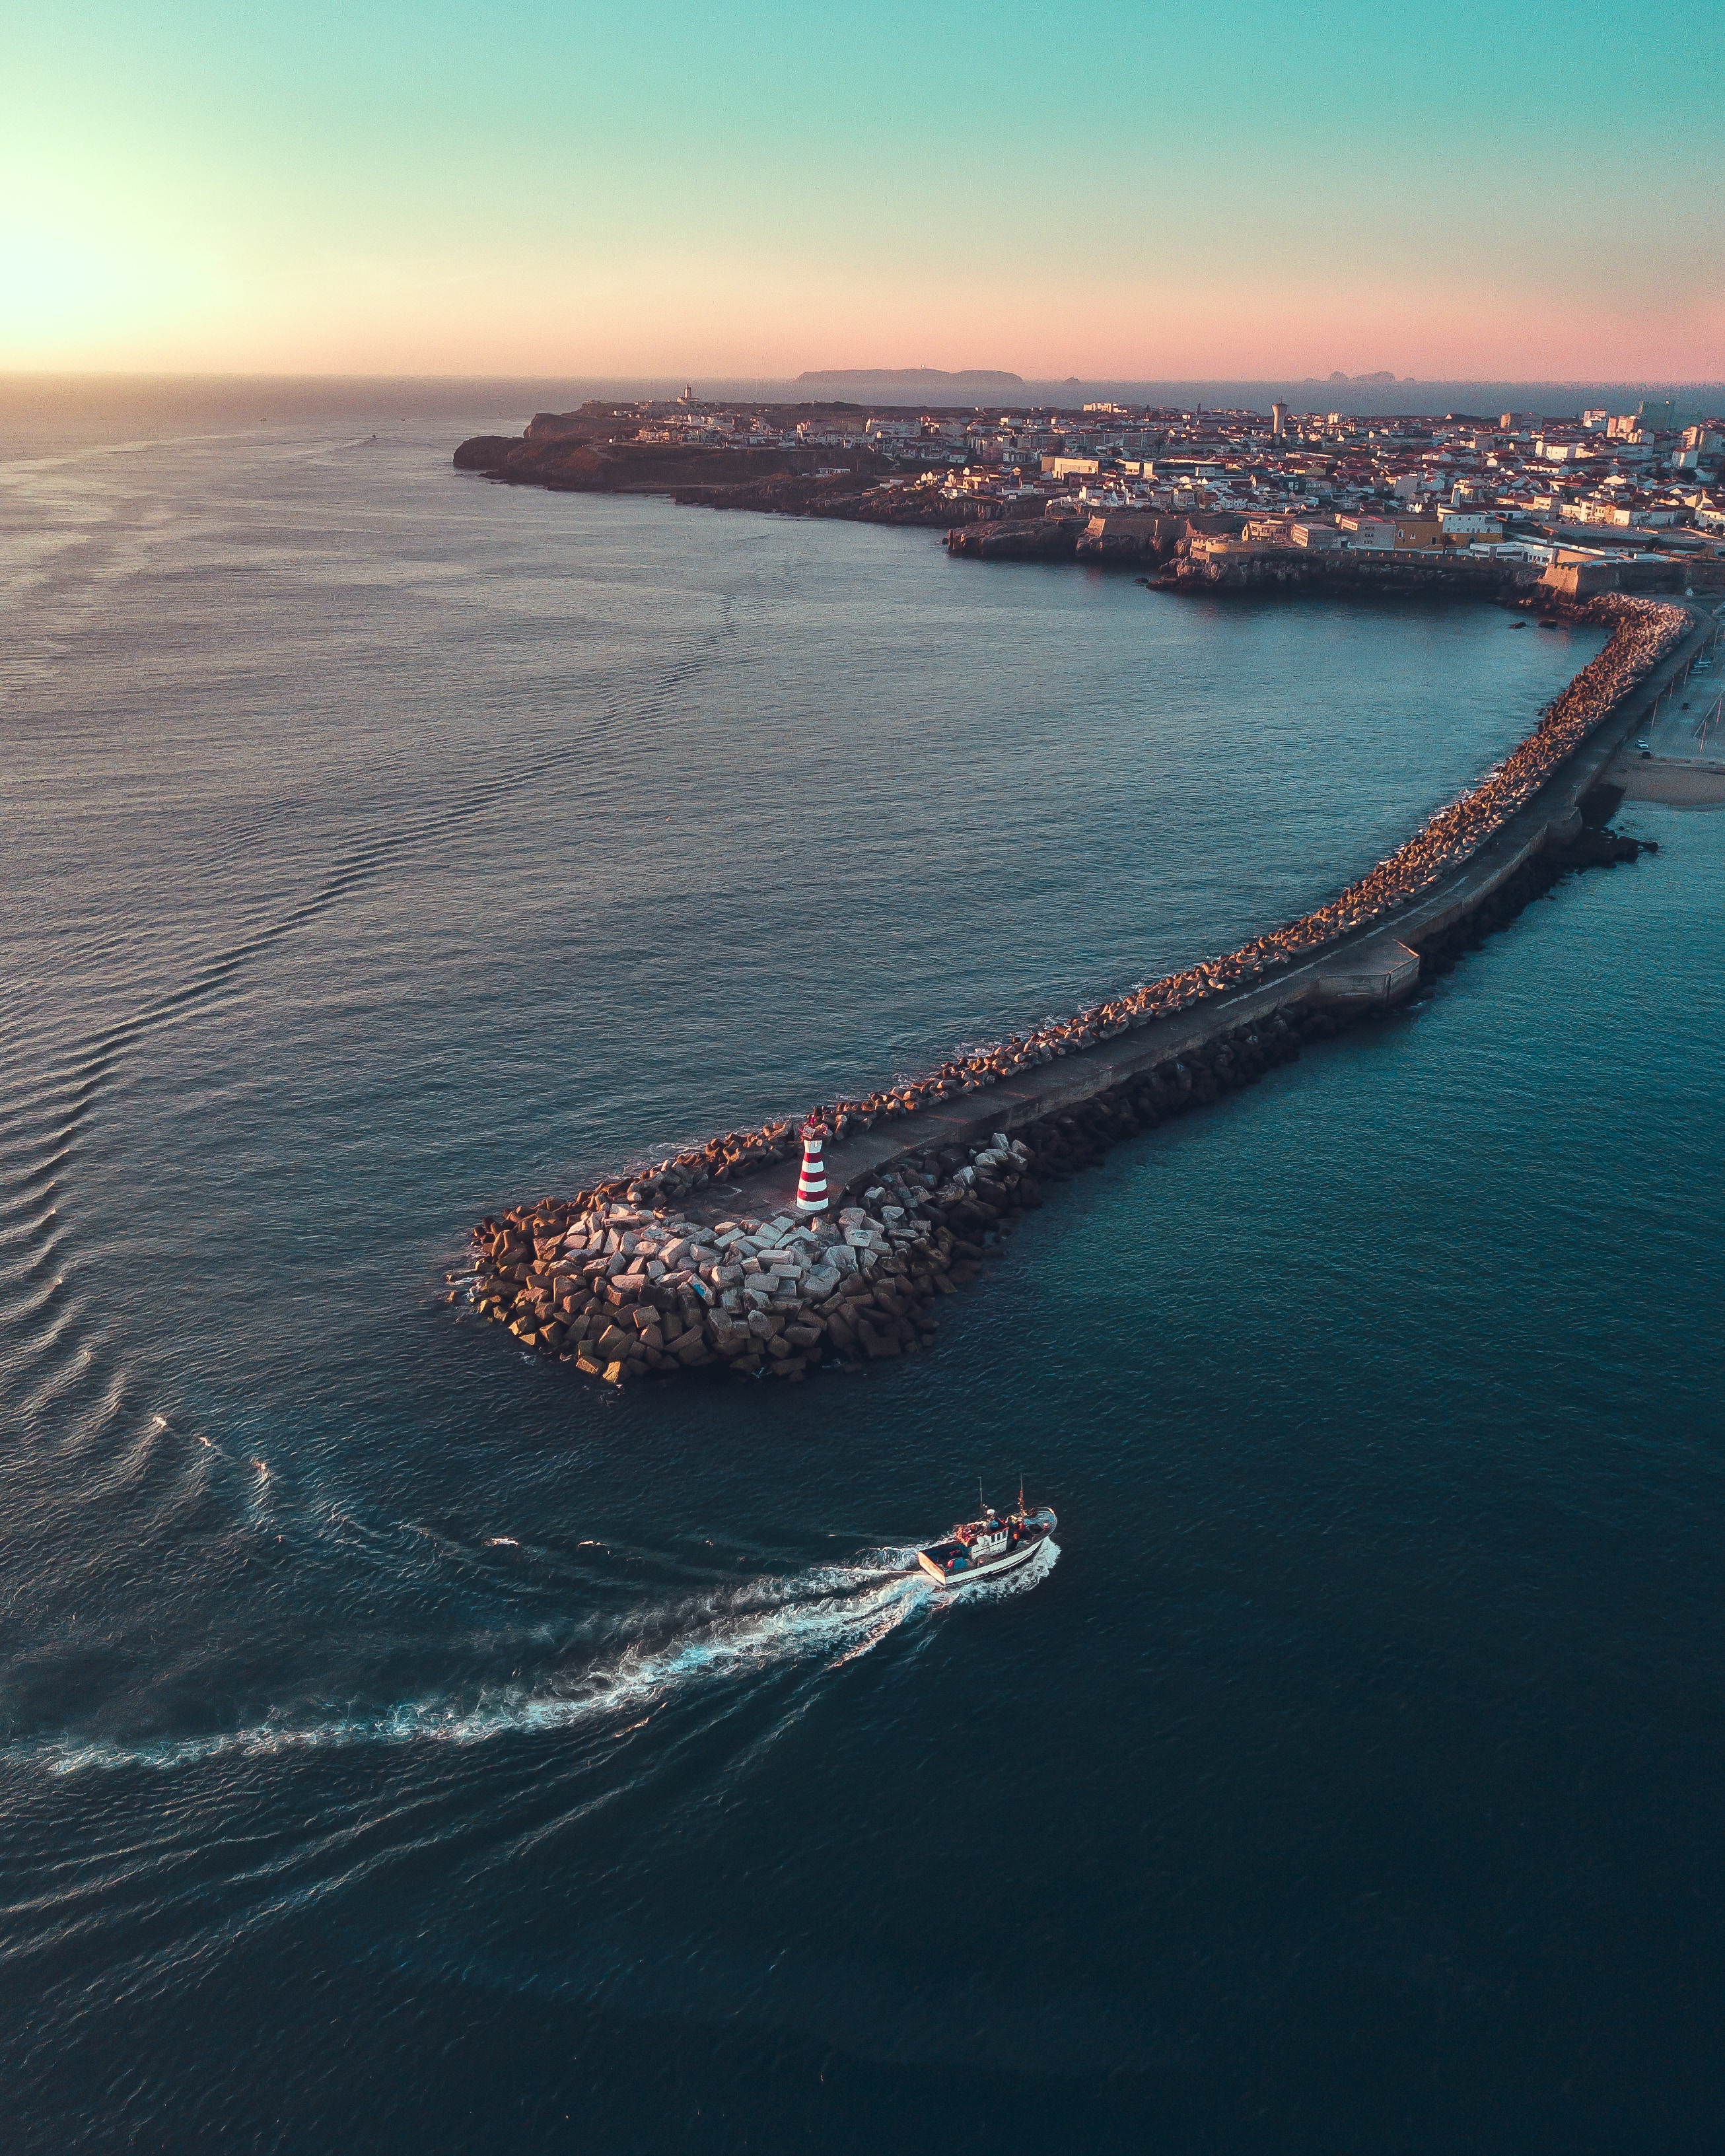 Free HD yacht, view from above, ocean, nature, city, pier